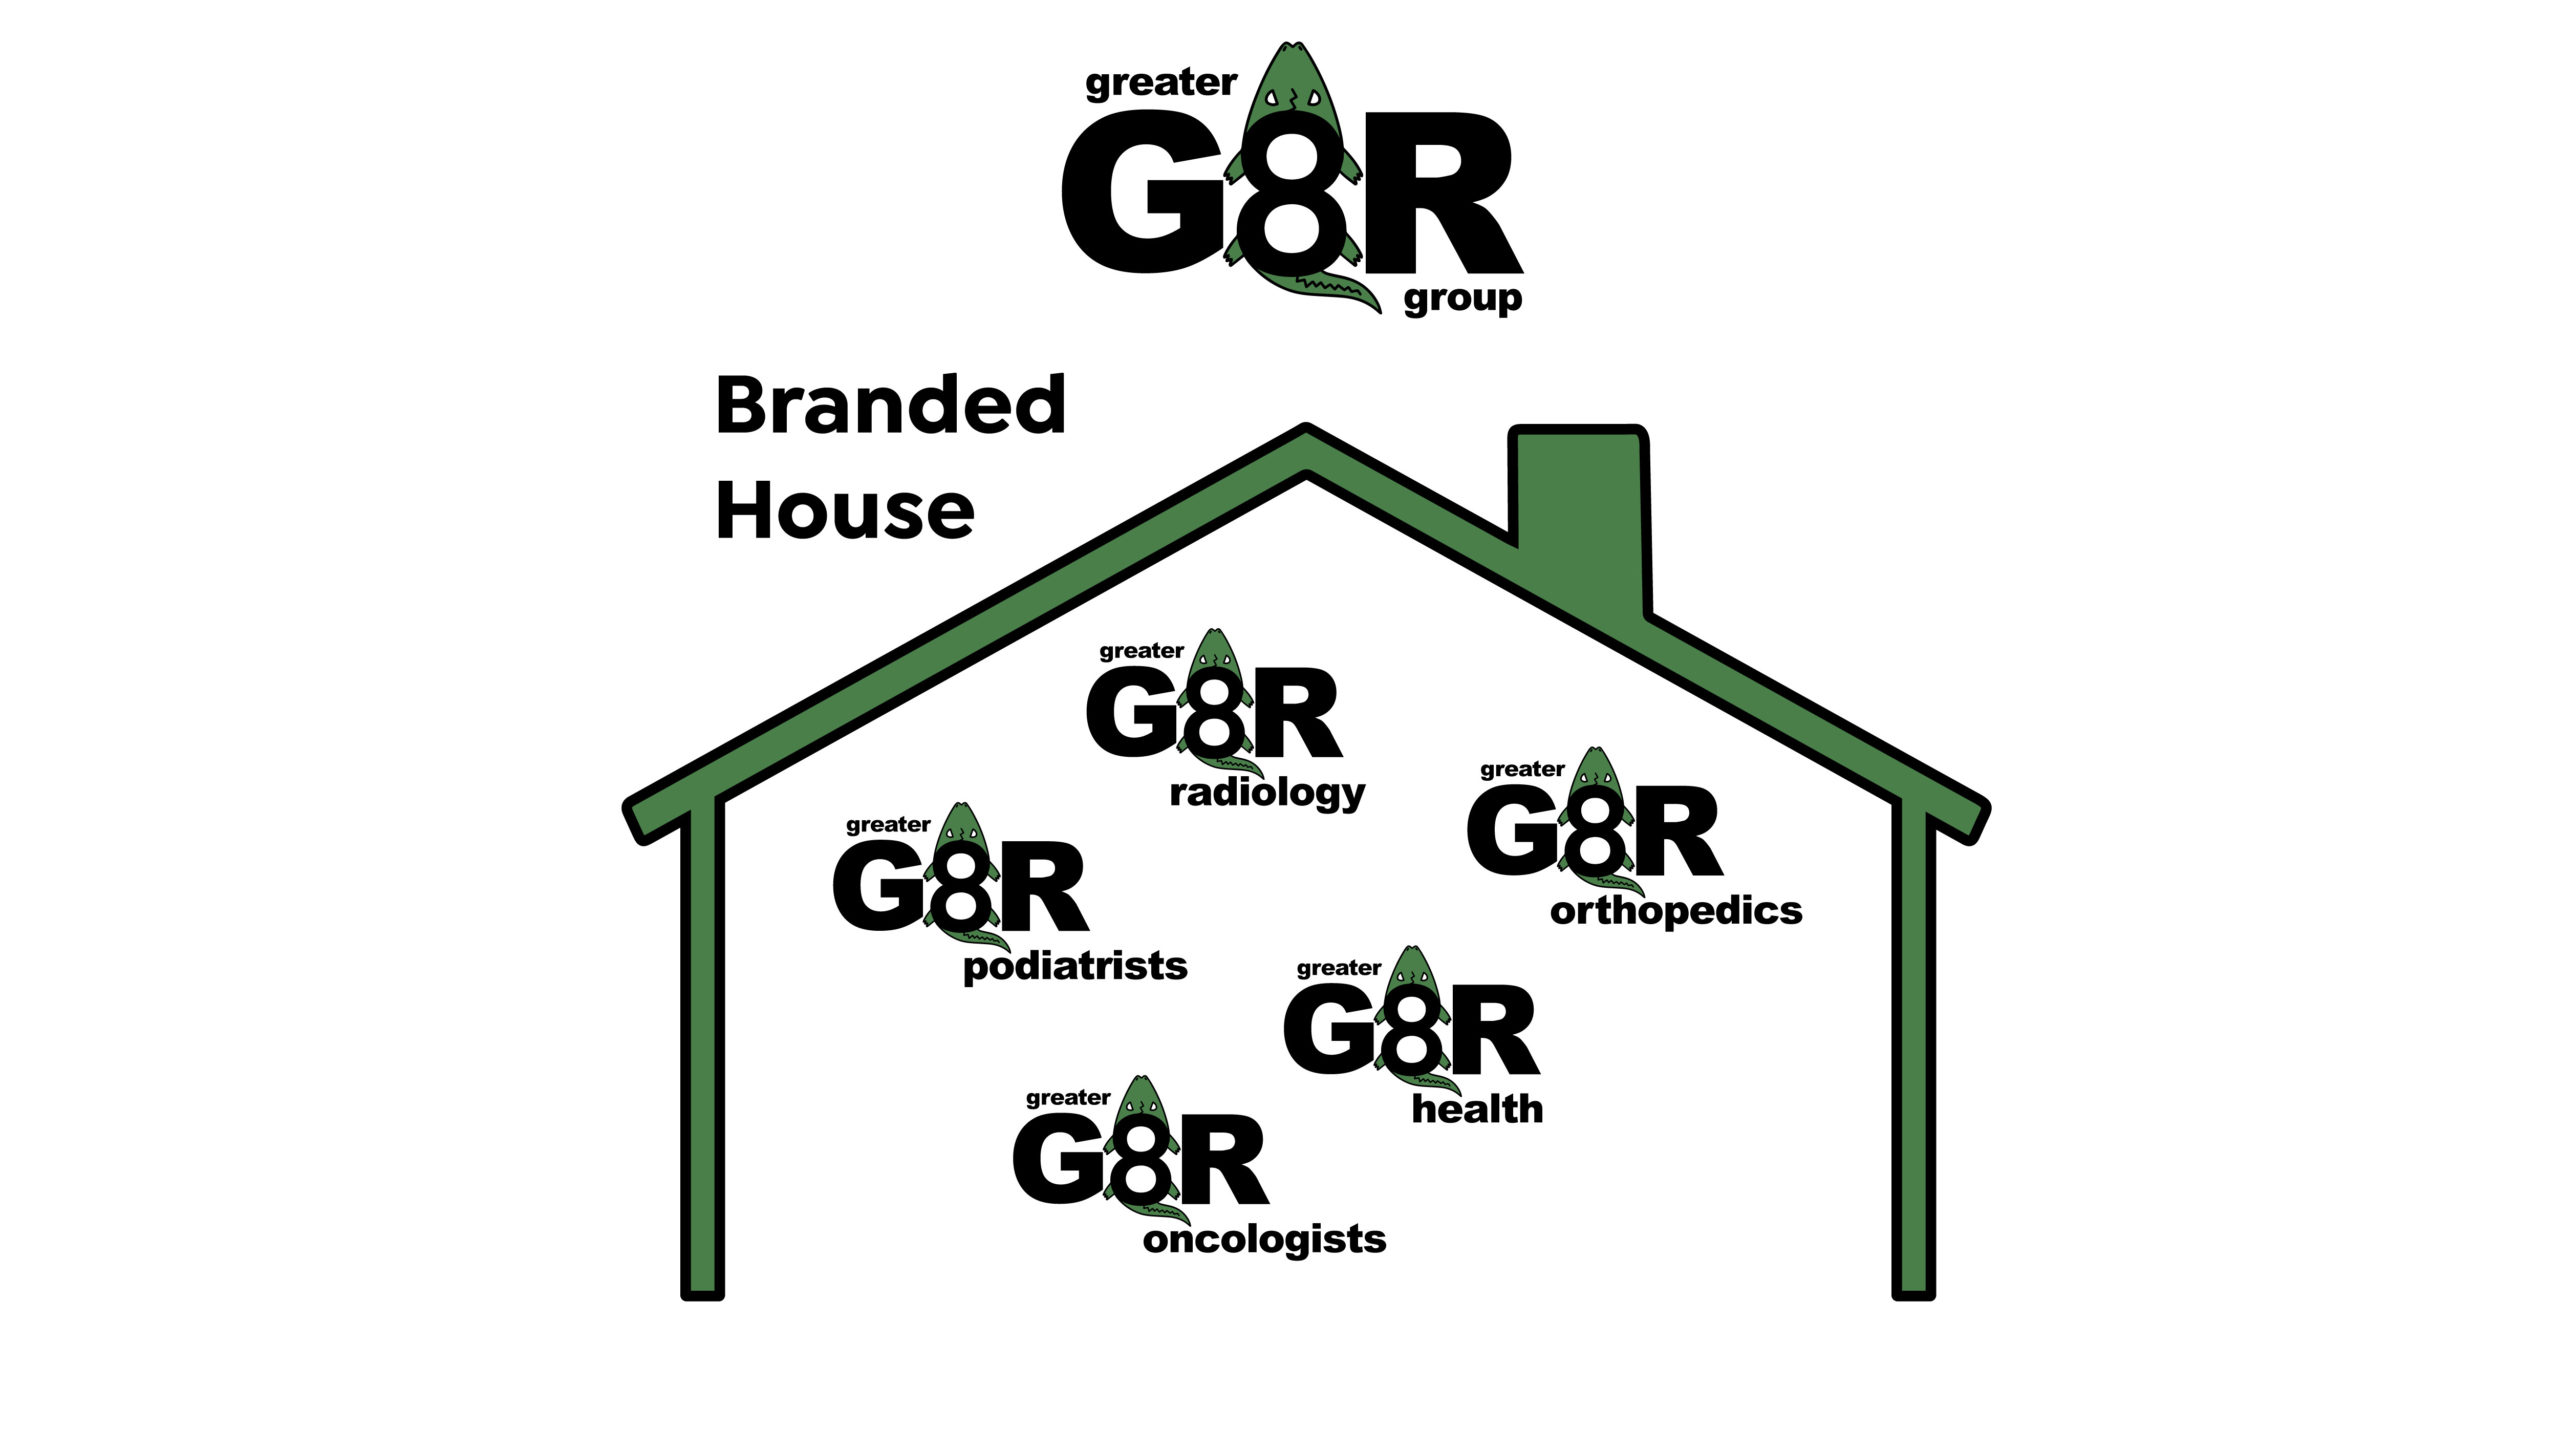 Part 3 – Healthcare Brand Consolidation: Marketing for a Branded House